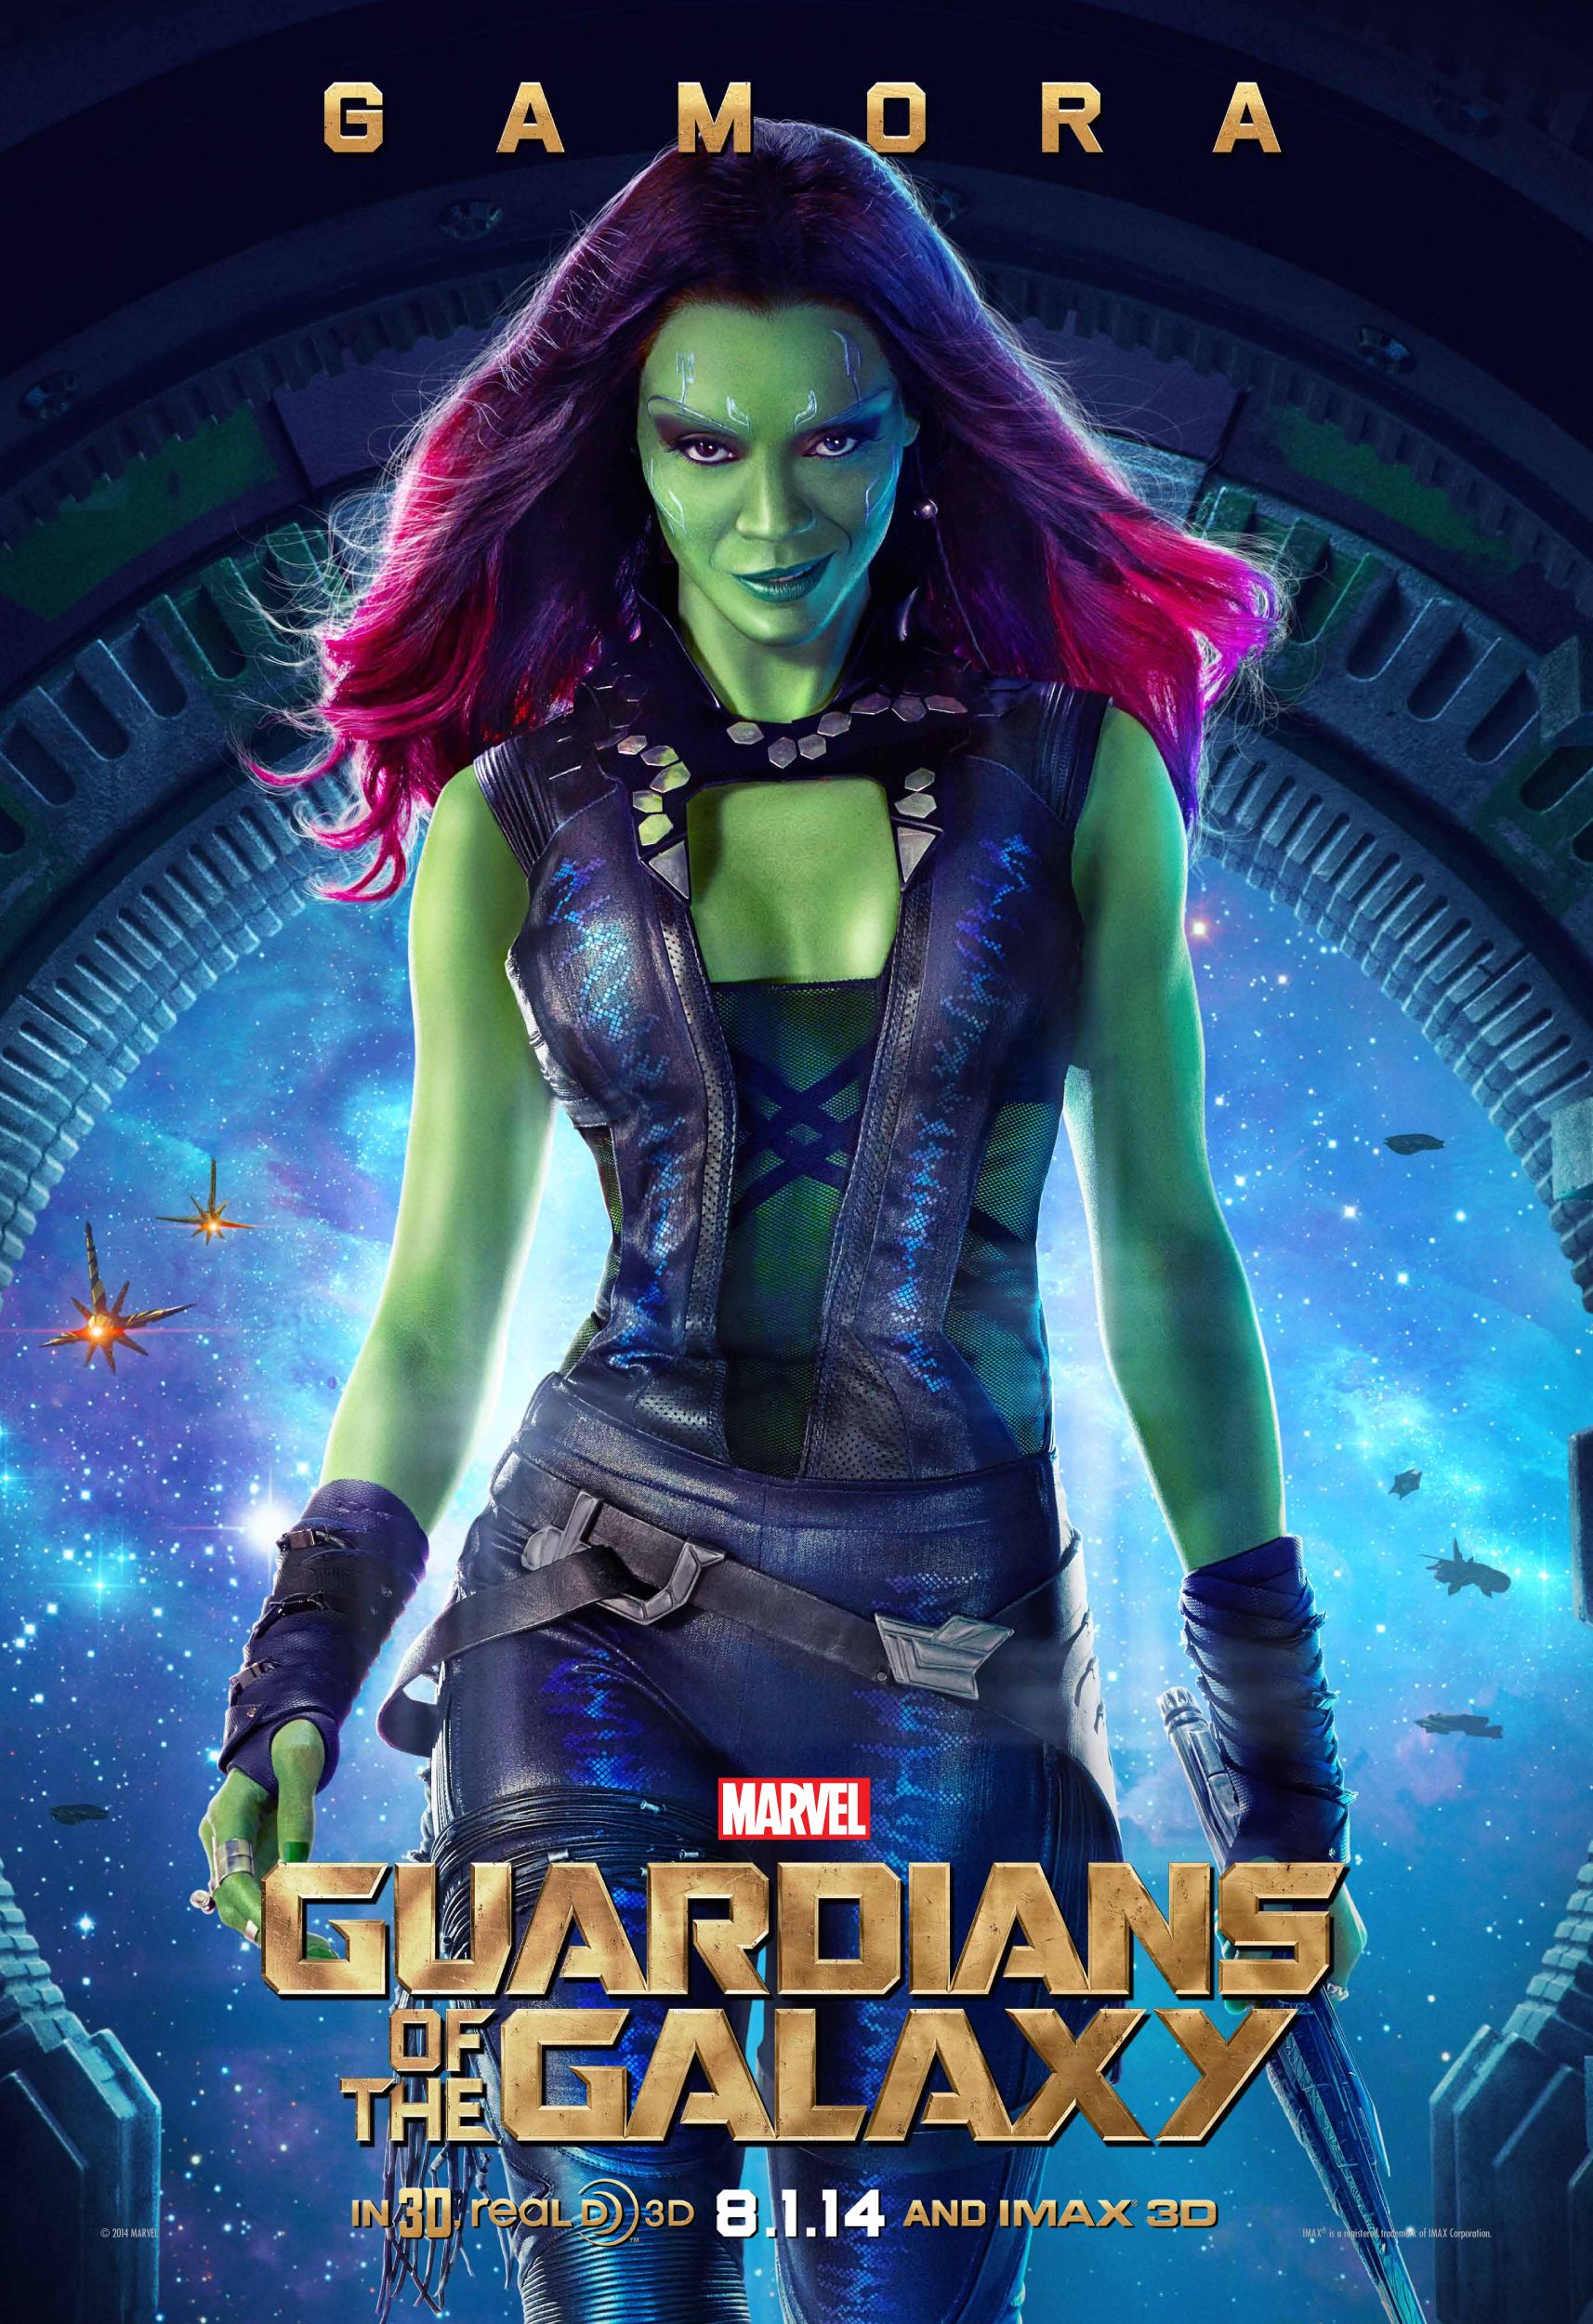 Guardians of the Galaxy Gamora Character Poster